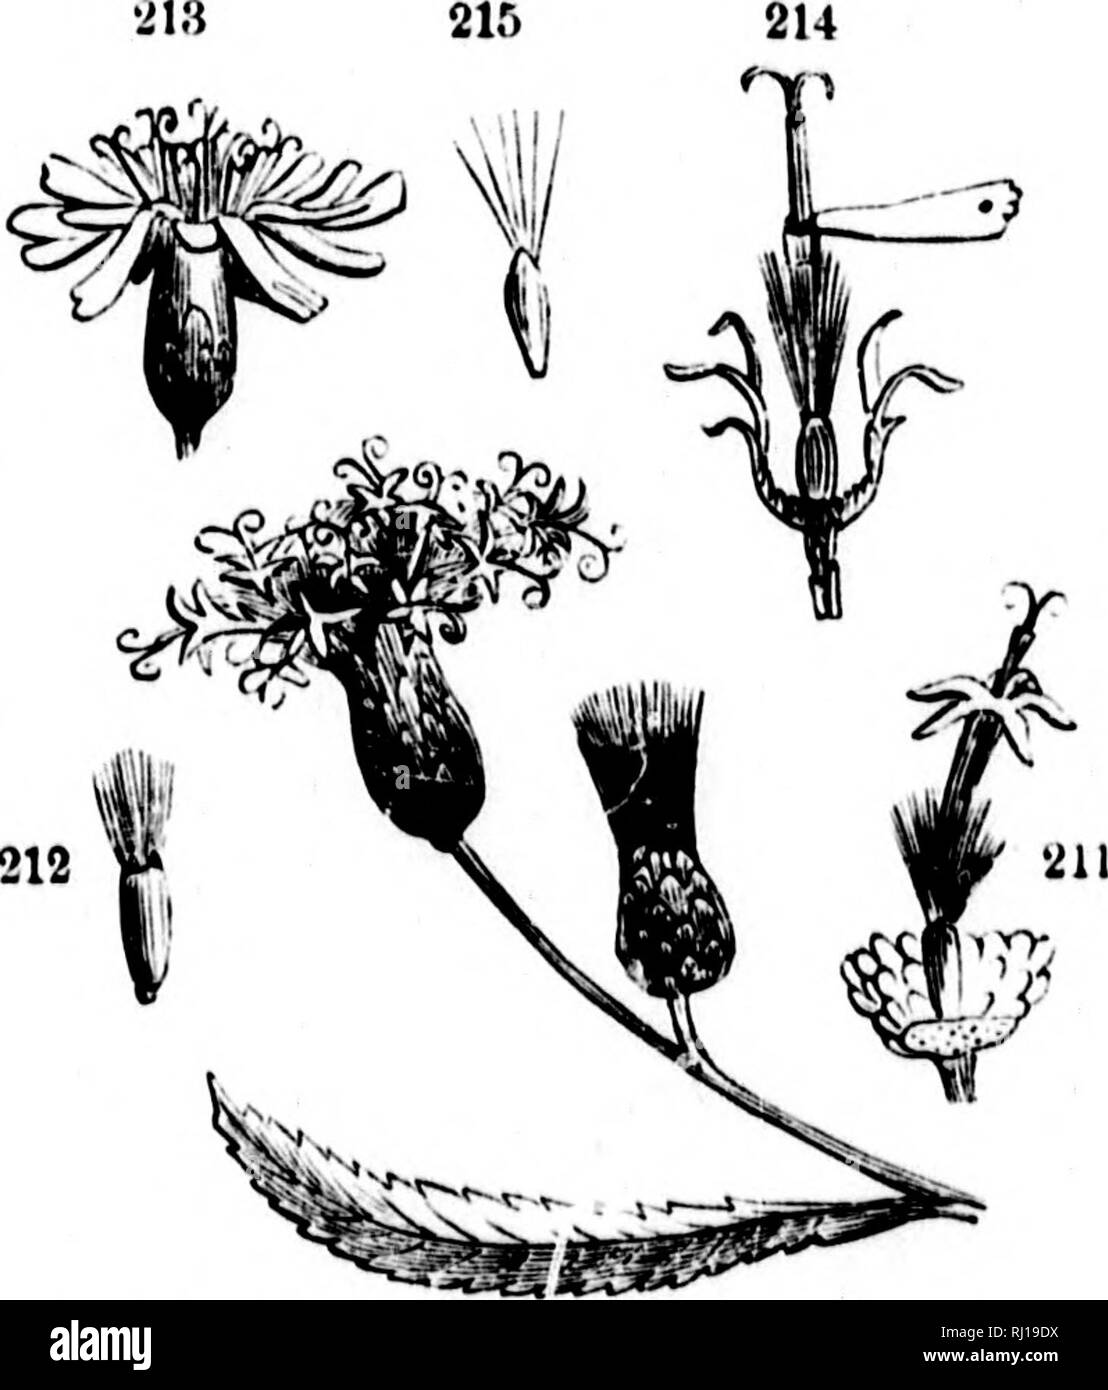 . Class-book of botany [microform] : being outlines of the structures, physiology, and classification of plants : with a flora of the United States and Canada. Botany; Botany; Plants; Plants; Botanique; Botanique; Plantes; Botanique. INFLORESCENCE. 7.'} 'â I themselves umbels, as in caraway and most of the Umbeliferae, a mm- â pottnd umbel is produced. Such secondary umbels are called umbtllets and the primary pedicels, rays. 352. The panicle is a compound inflorescence formed by the irregu- lar branching of the pedicels of the raceme, as in oats, spear-grass, (-'atalpa. 353. A TiiYRs*: is a s Stock Photo